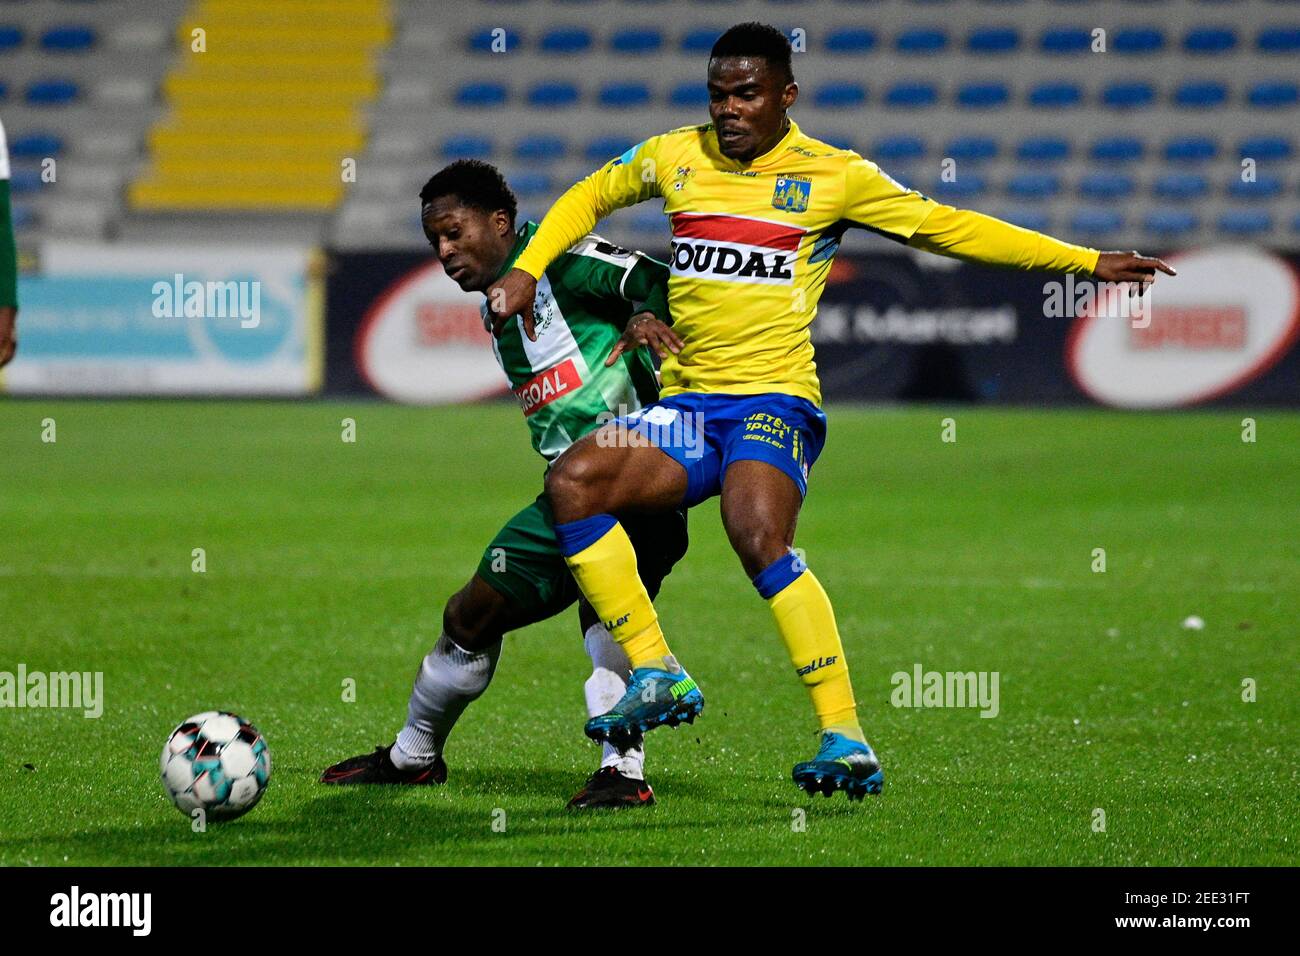 Lommel's Marlos Moreno and Westerlo's Kouya Mabea fight for the ball during a soccer match between KVC Westerlo and Lommel SK, Monday 15 February 2021 Stock Photo